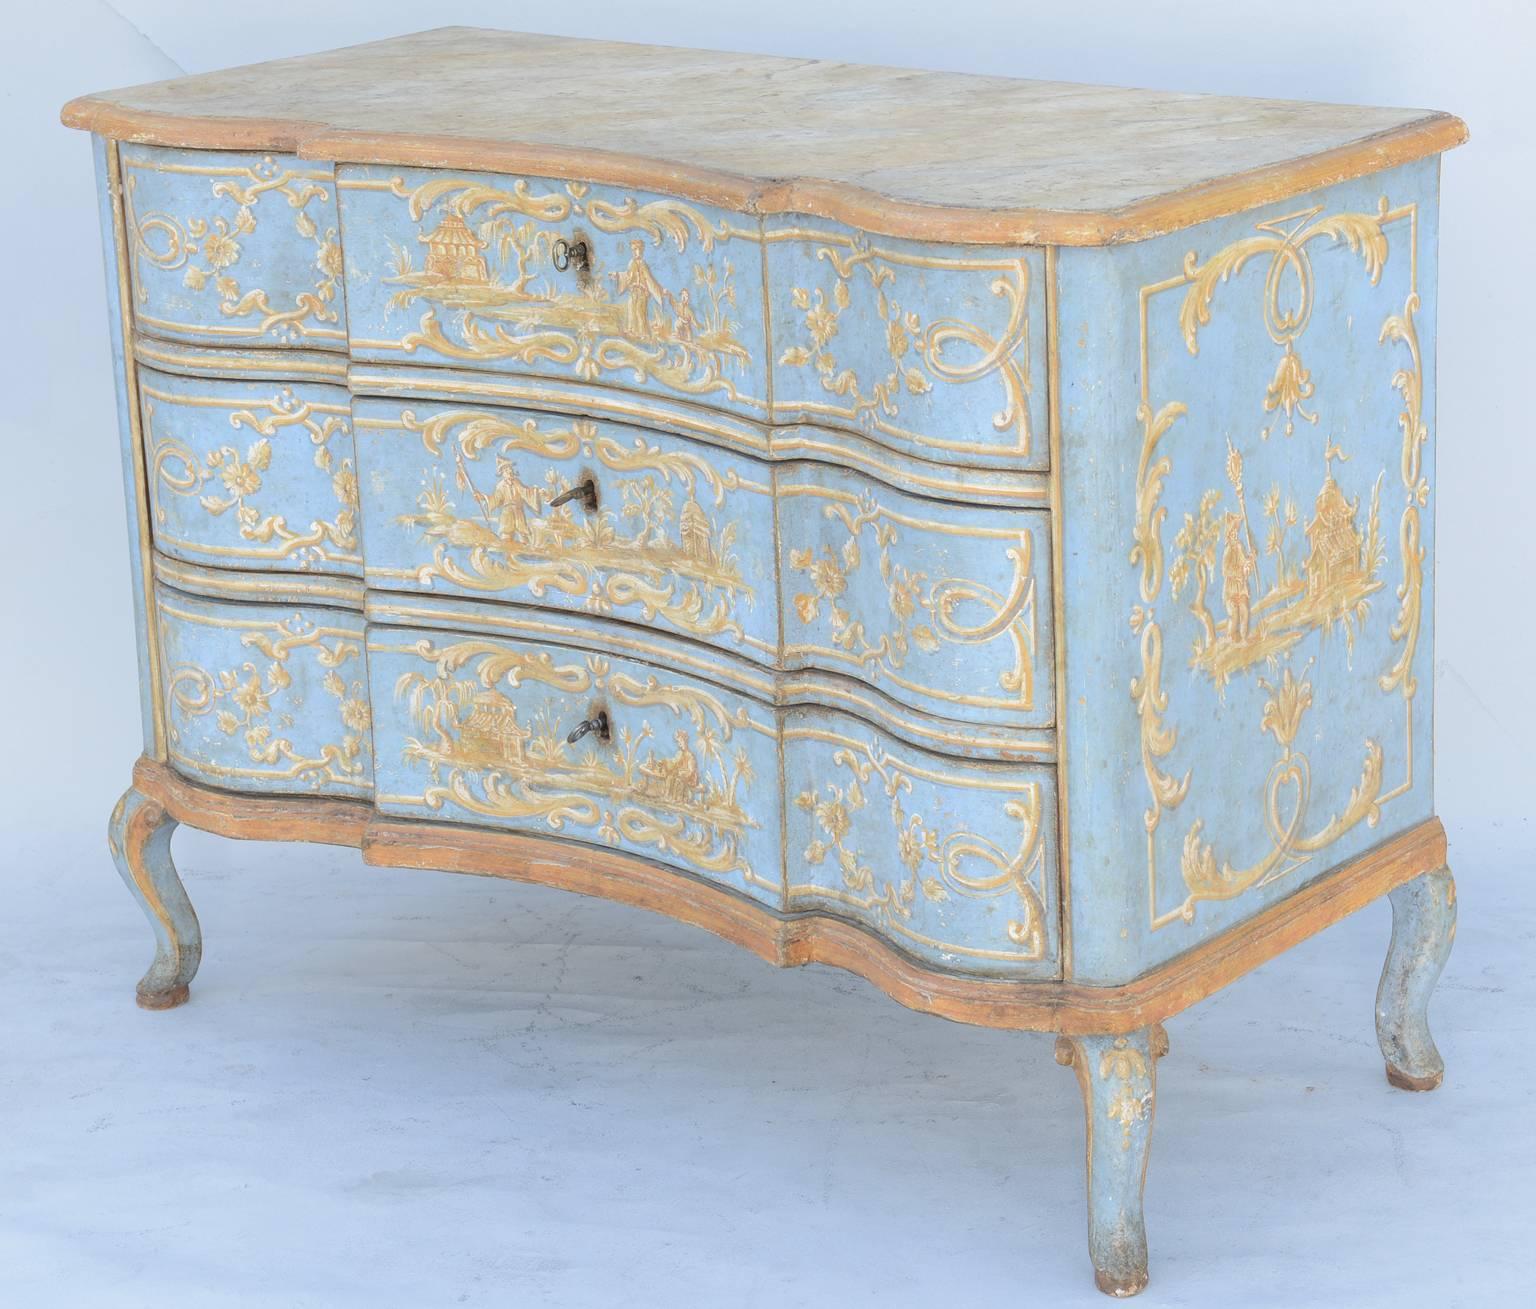 Exceptional Venetian commode, having a faux painted, serpentine molded top, on conforming case, with three stack-drawers, raised on scroll-headed splayed legs, its entire case with later decoration (early 20th century), hand-painted with chinoiserie